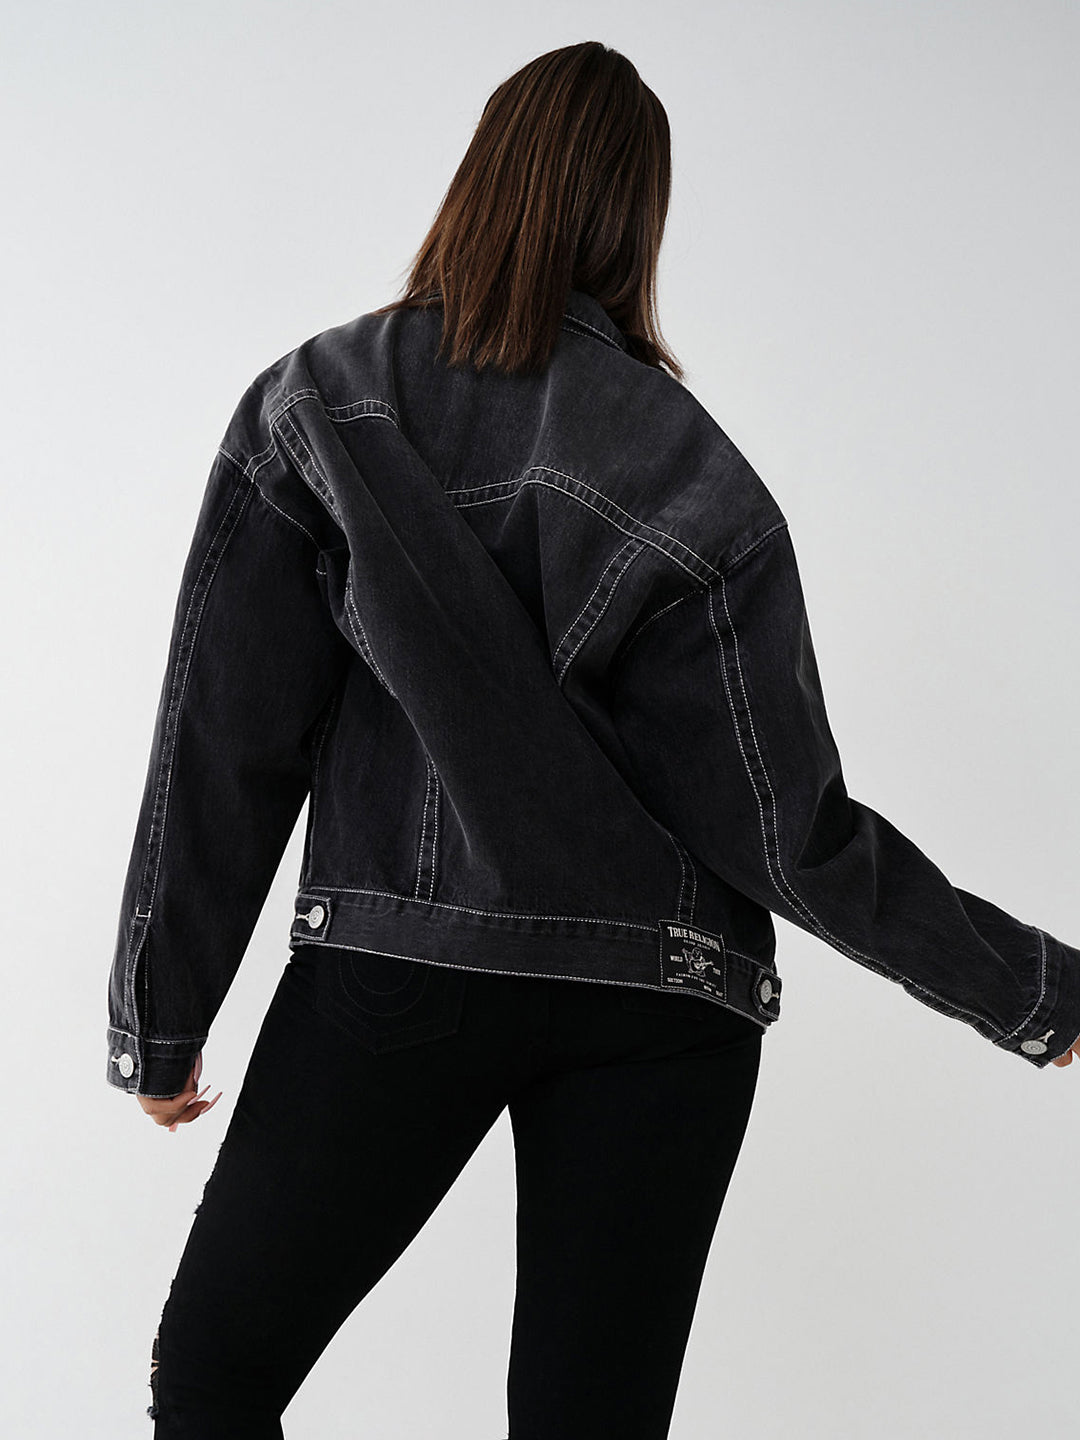 Acne Studios - Relaxed Fit Denim Jacket | HBX - Globally Curated Fashion  and Lifestyle by Hypebeast